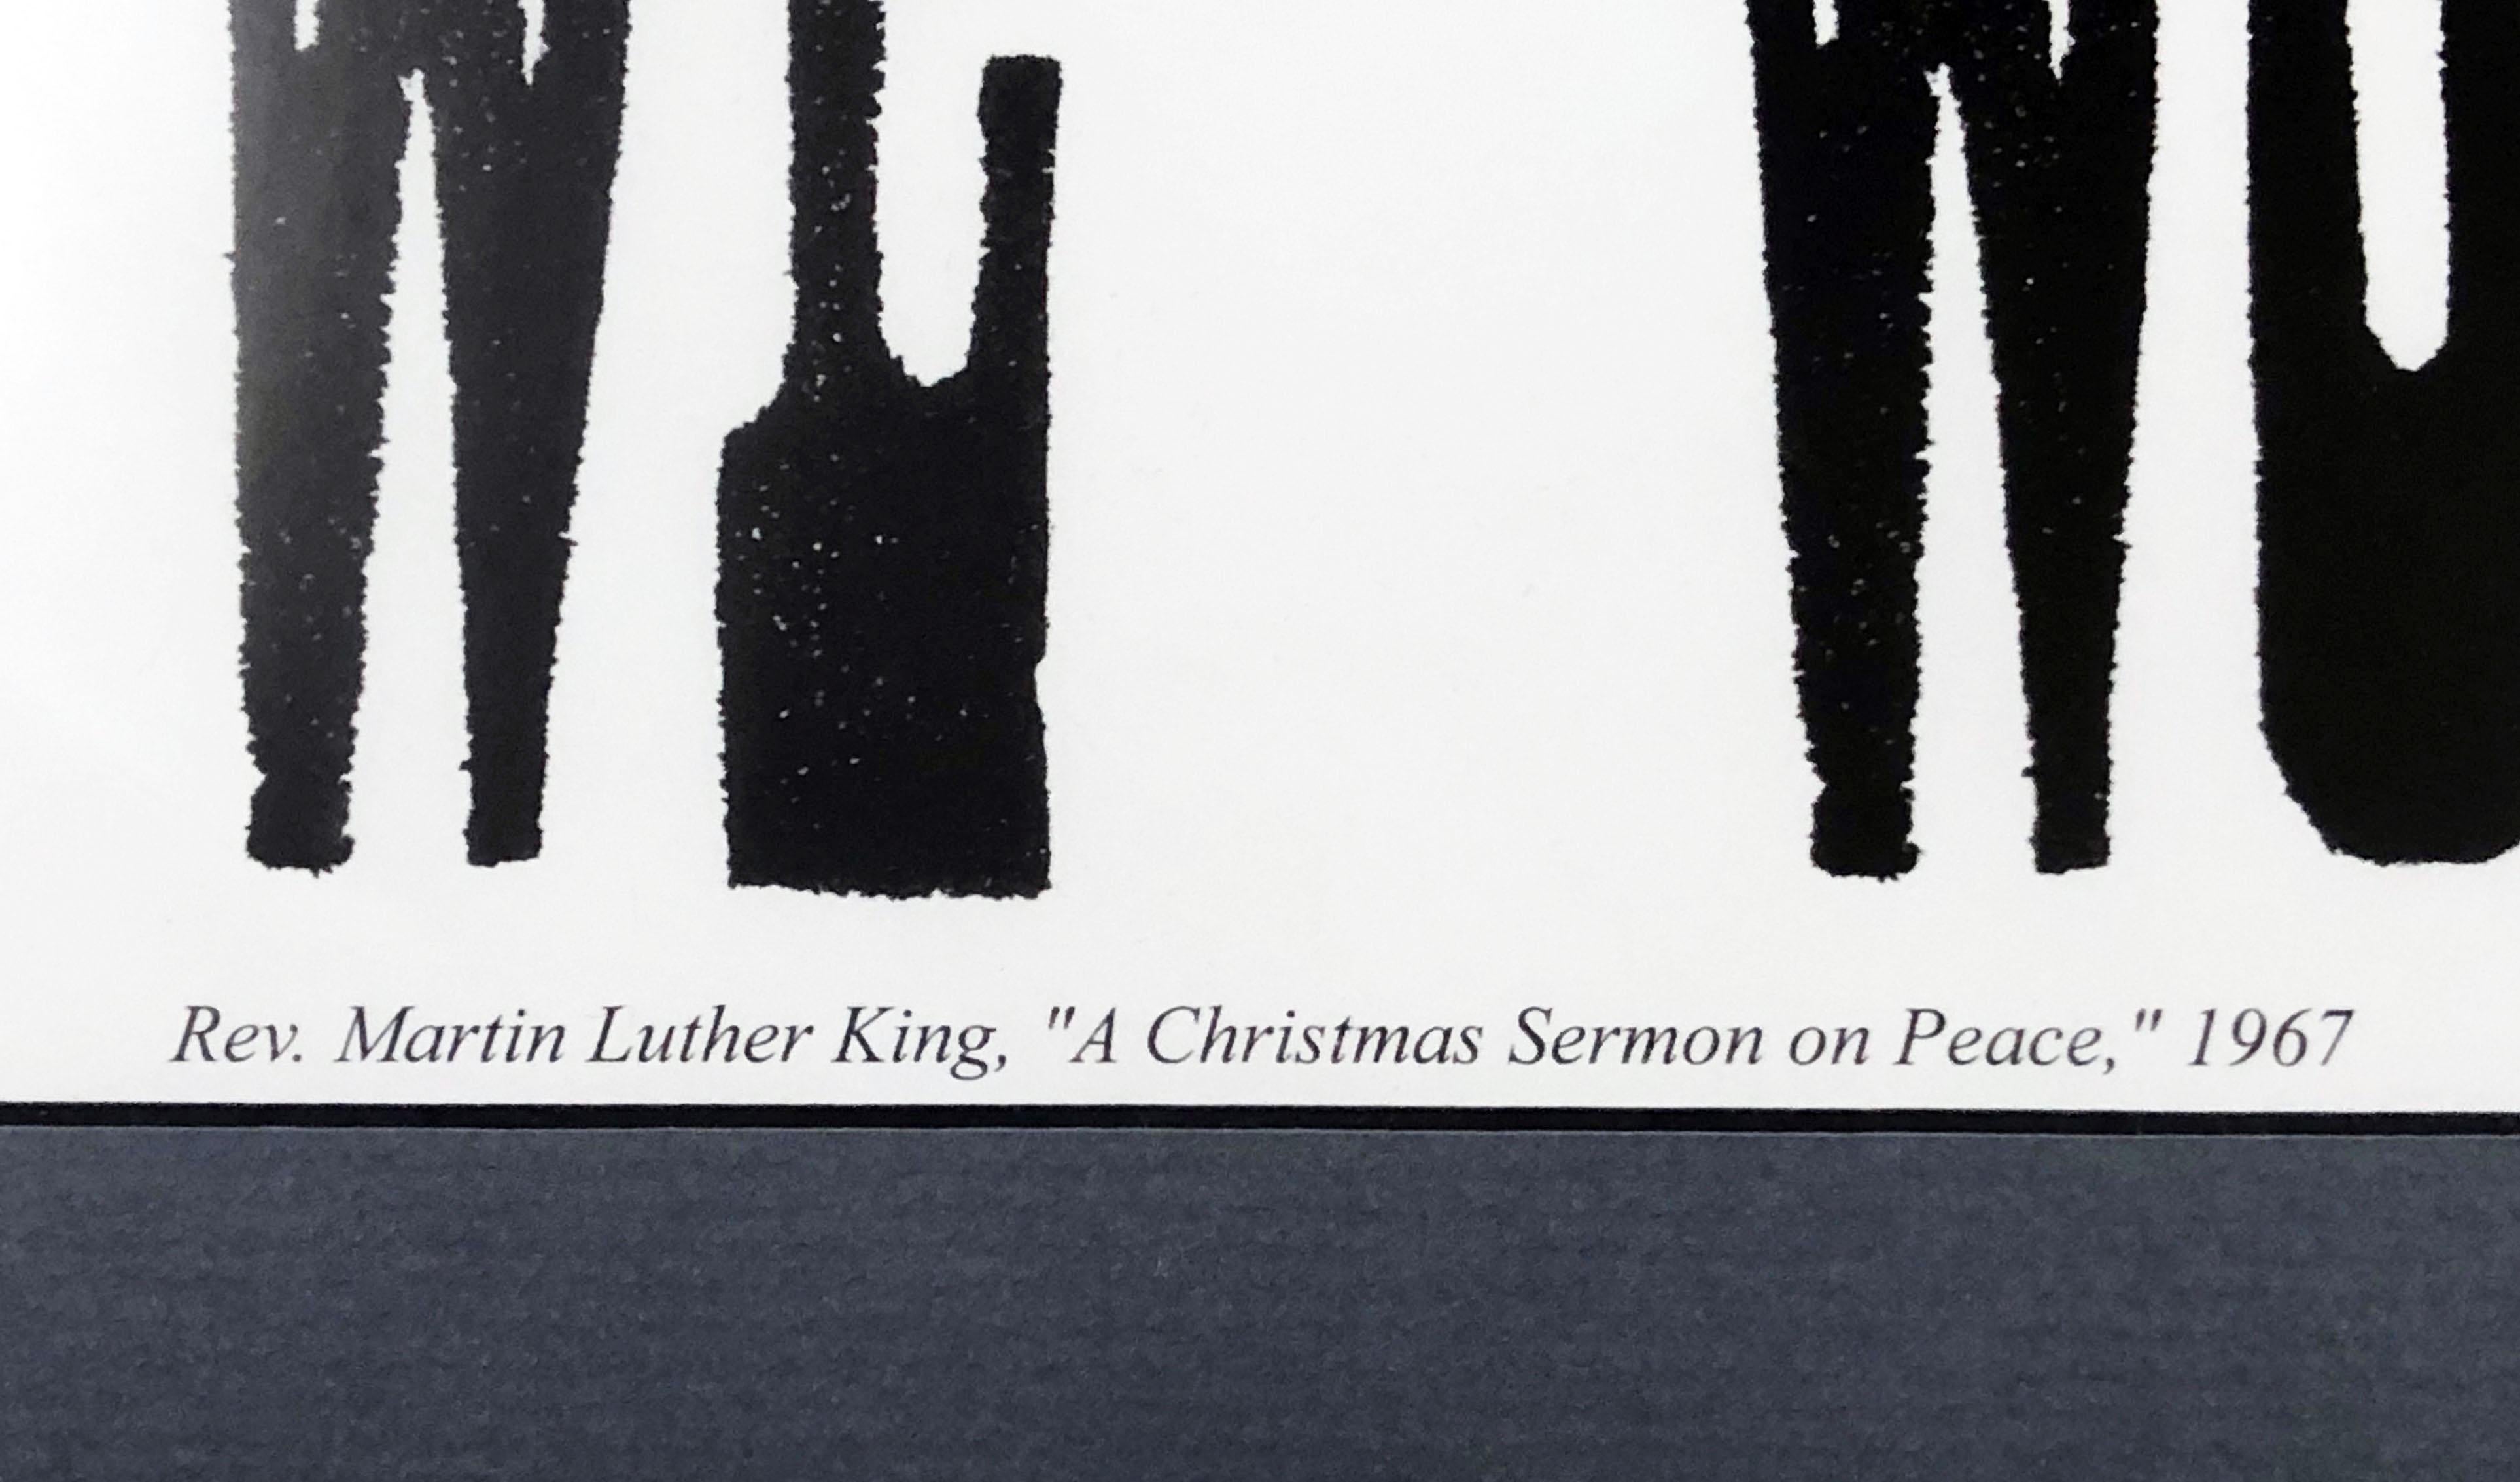 Mid-Century Modern Martin Luther King, Jr. Sermon on Peace Lithograph by John August Swanson